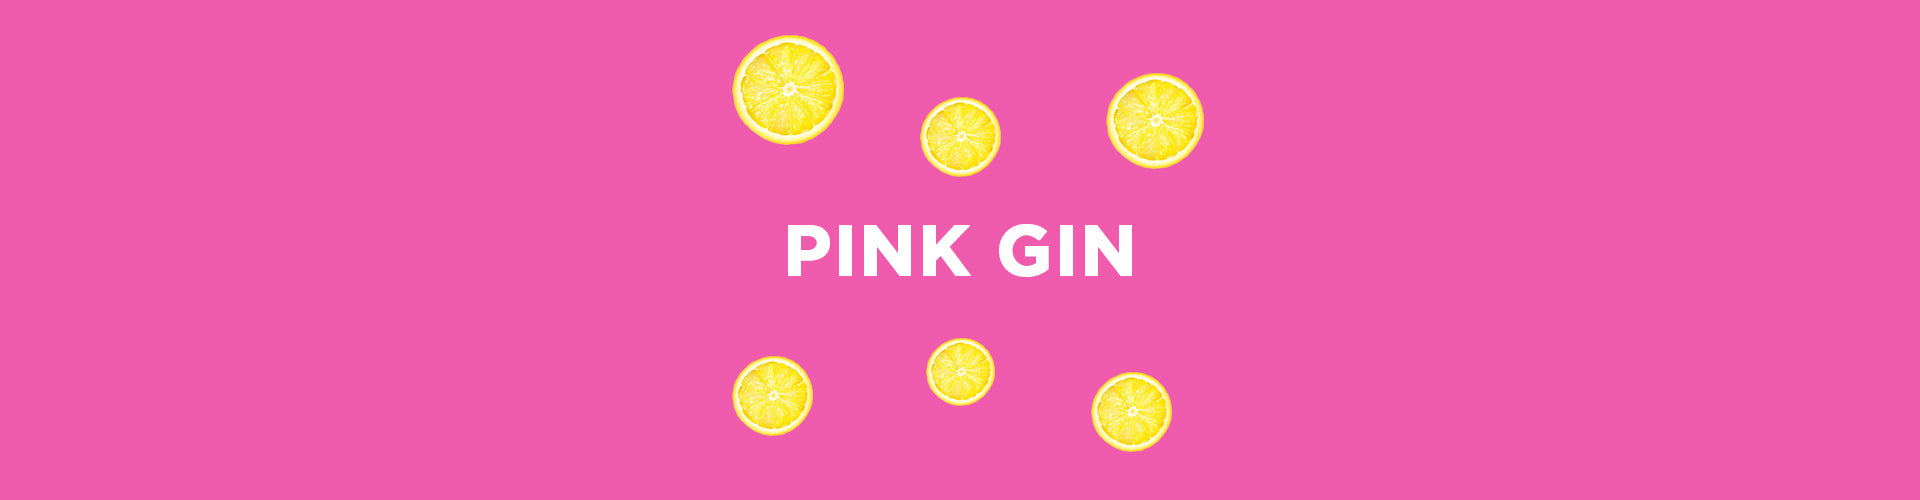 Can You Say Pink Gin?